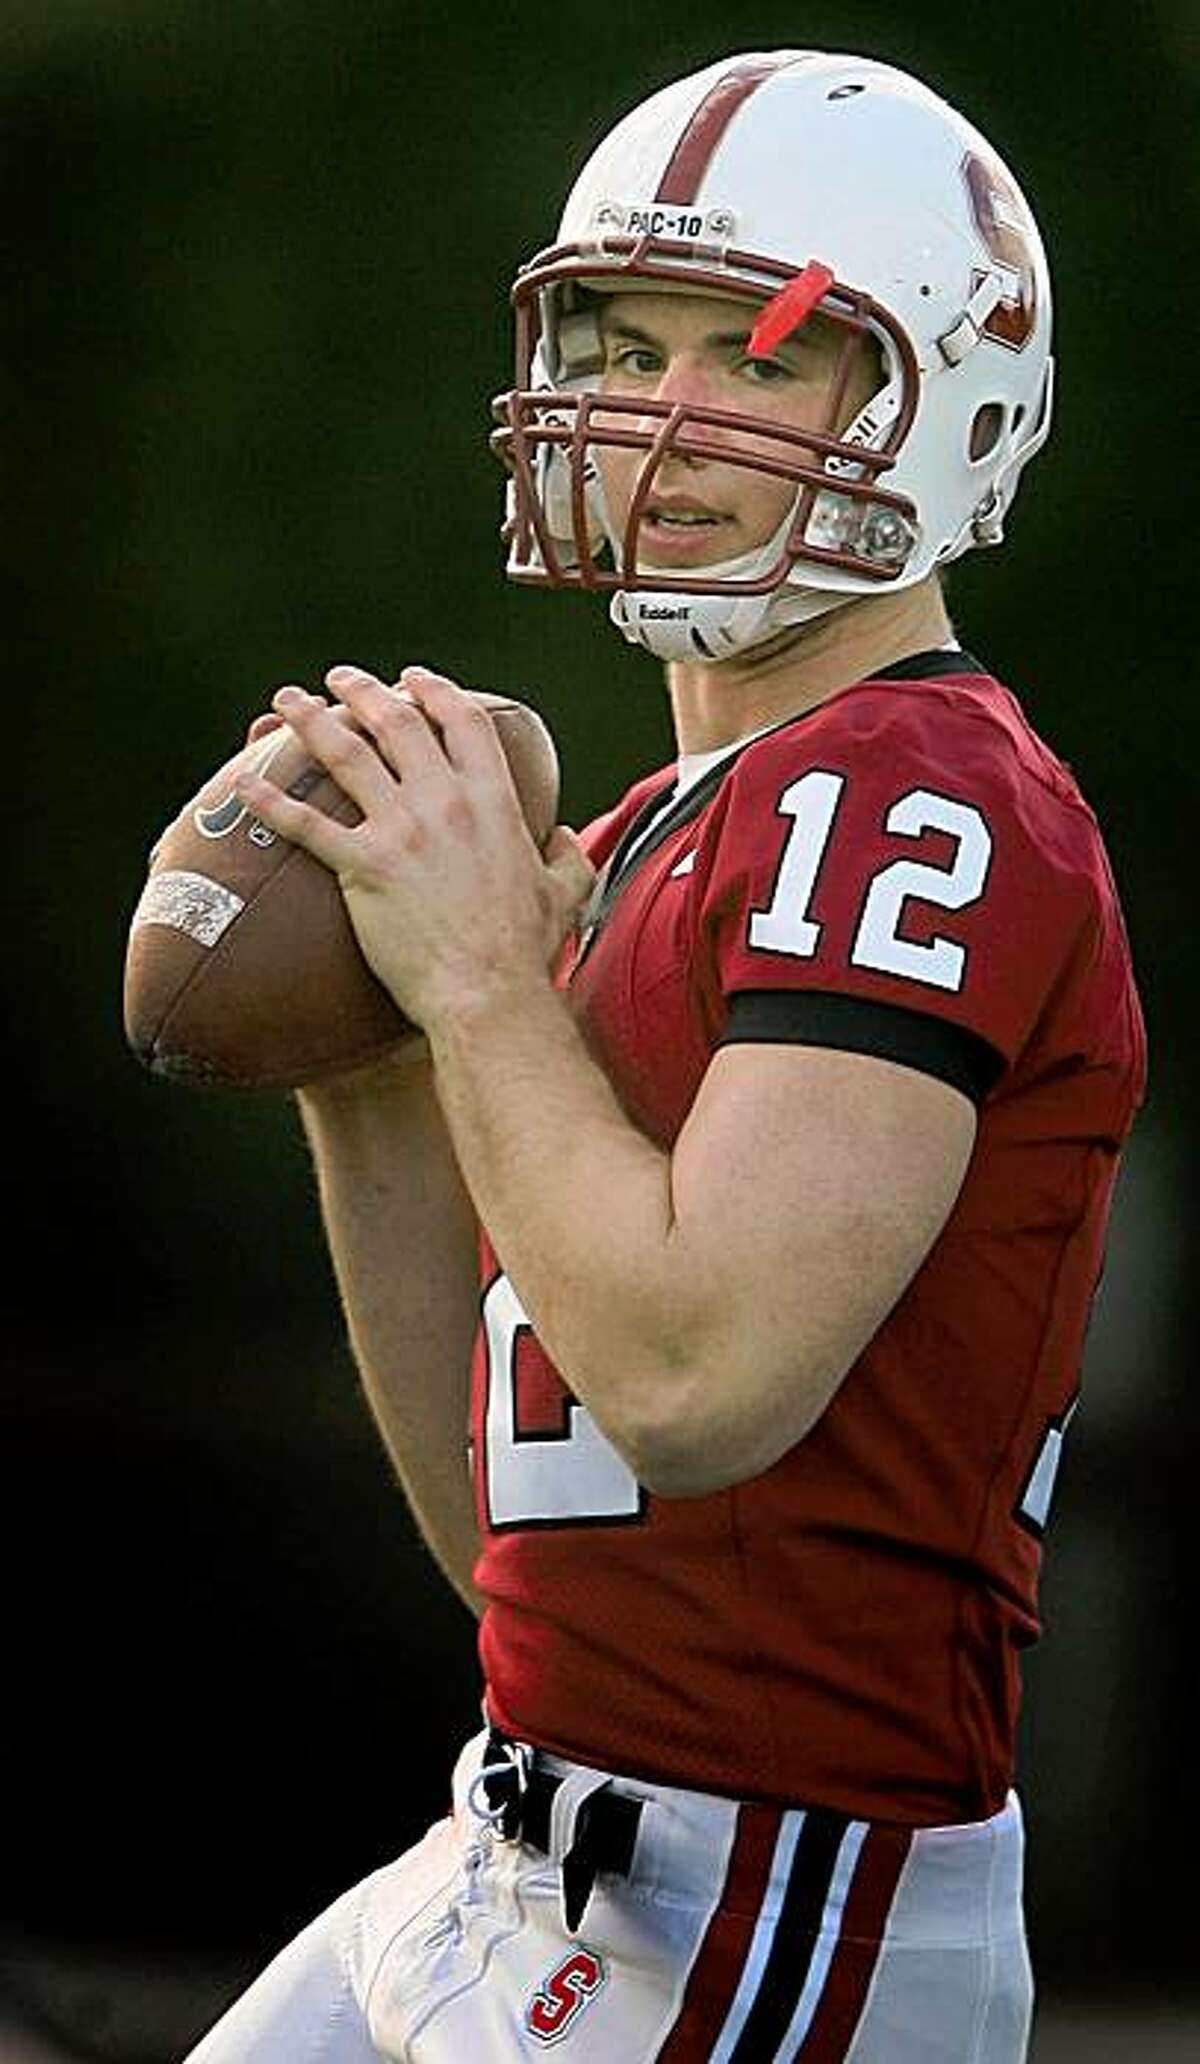 Stanford quarterback Andrew Luck practices in Palo Alto, Calif. on Tuesday, February 24, 2009.